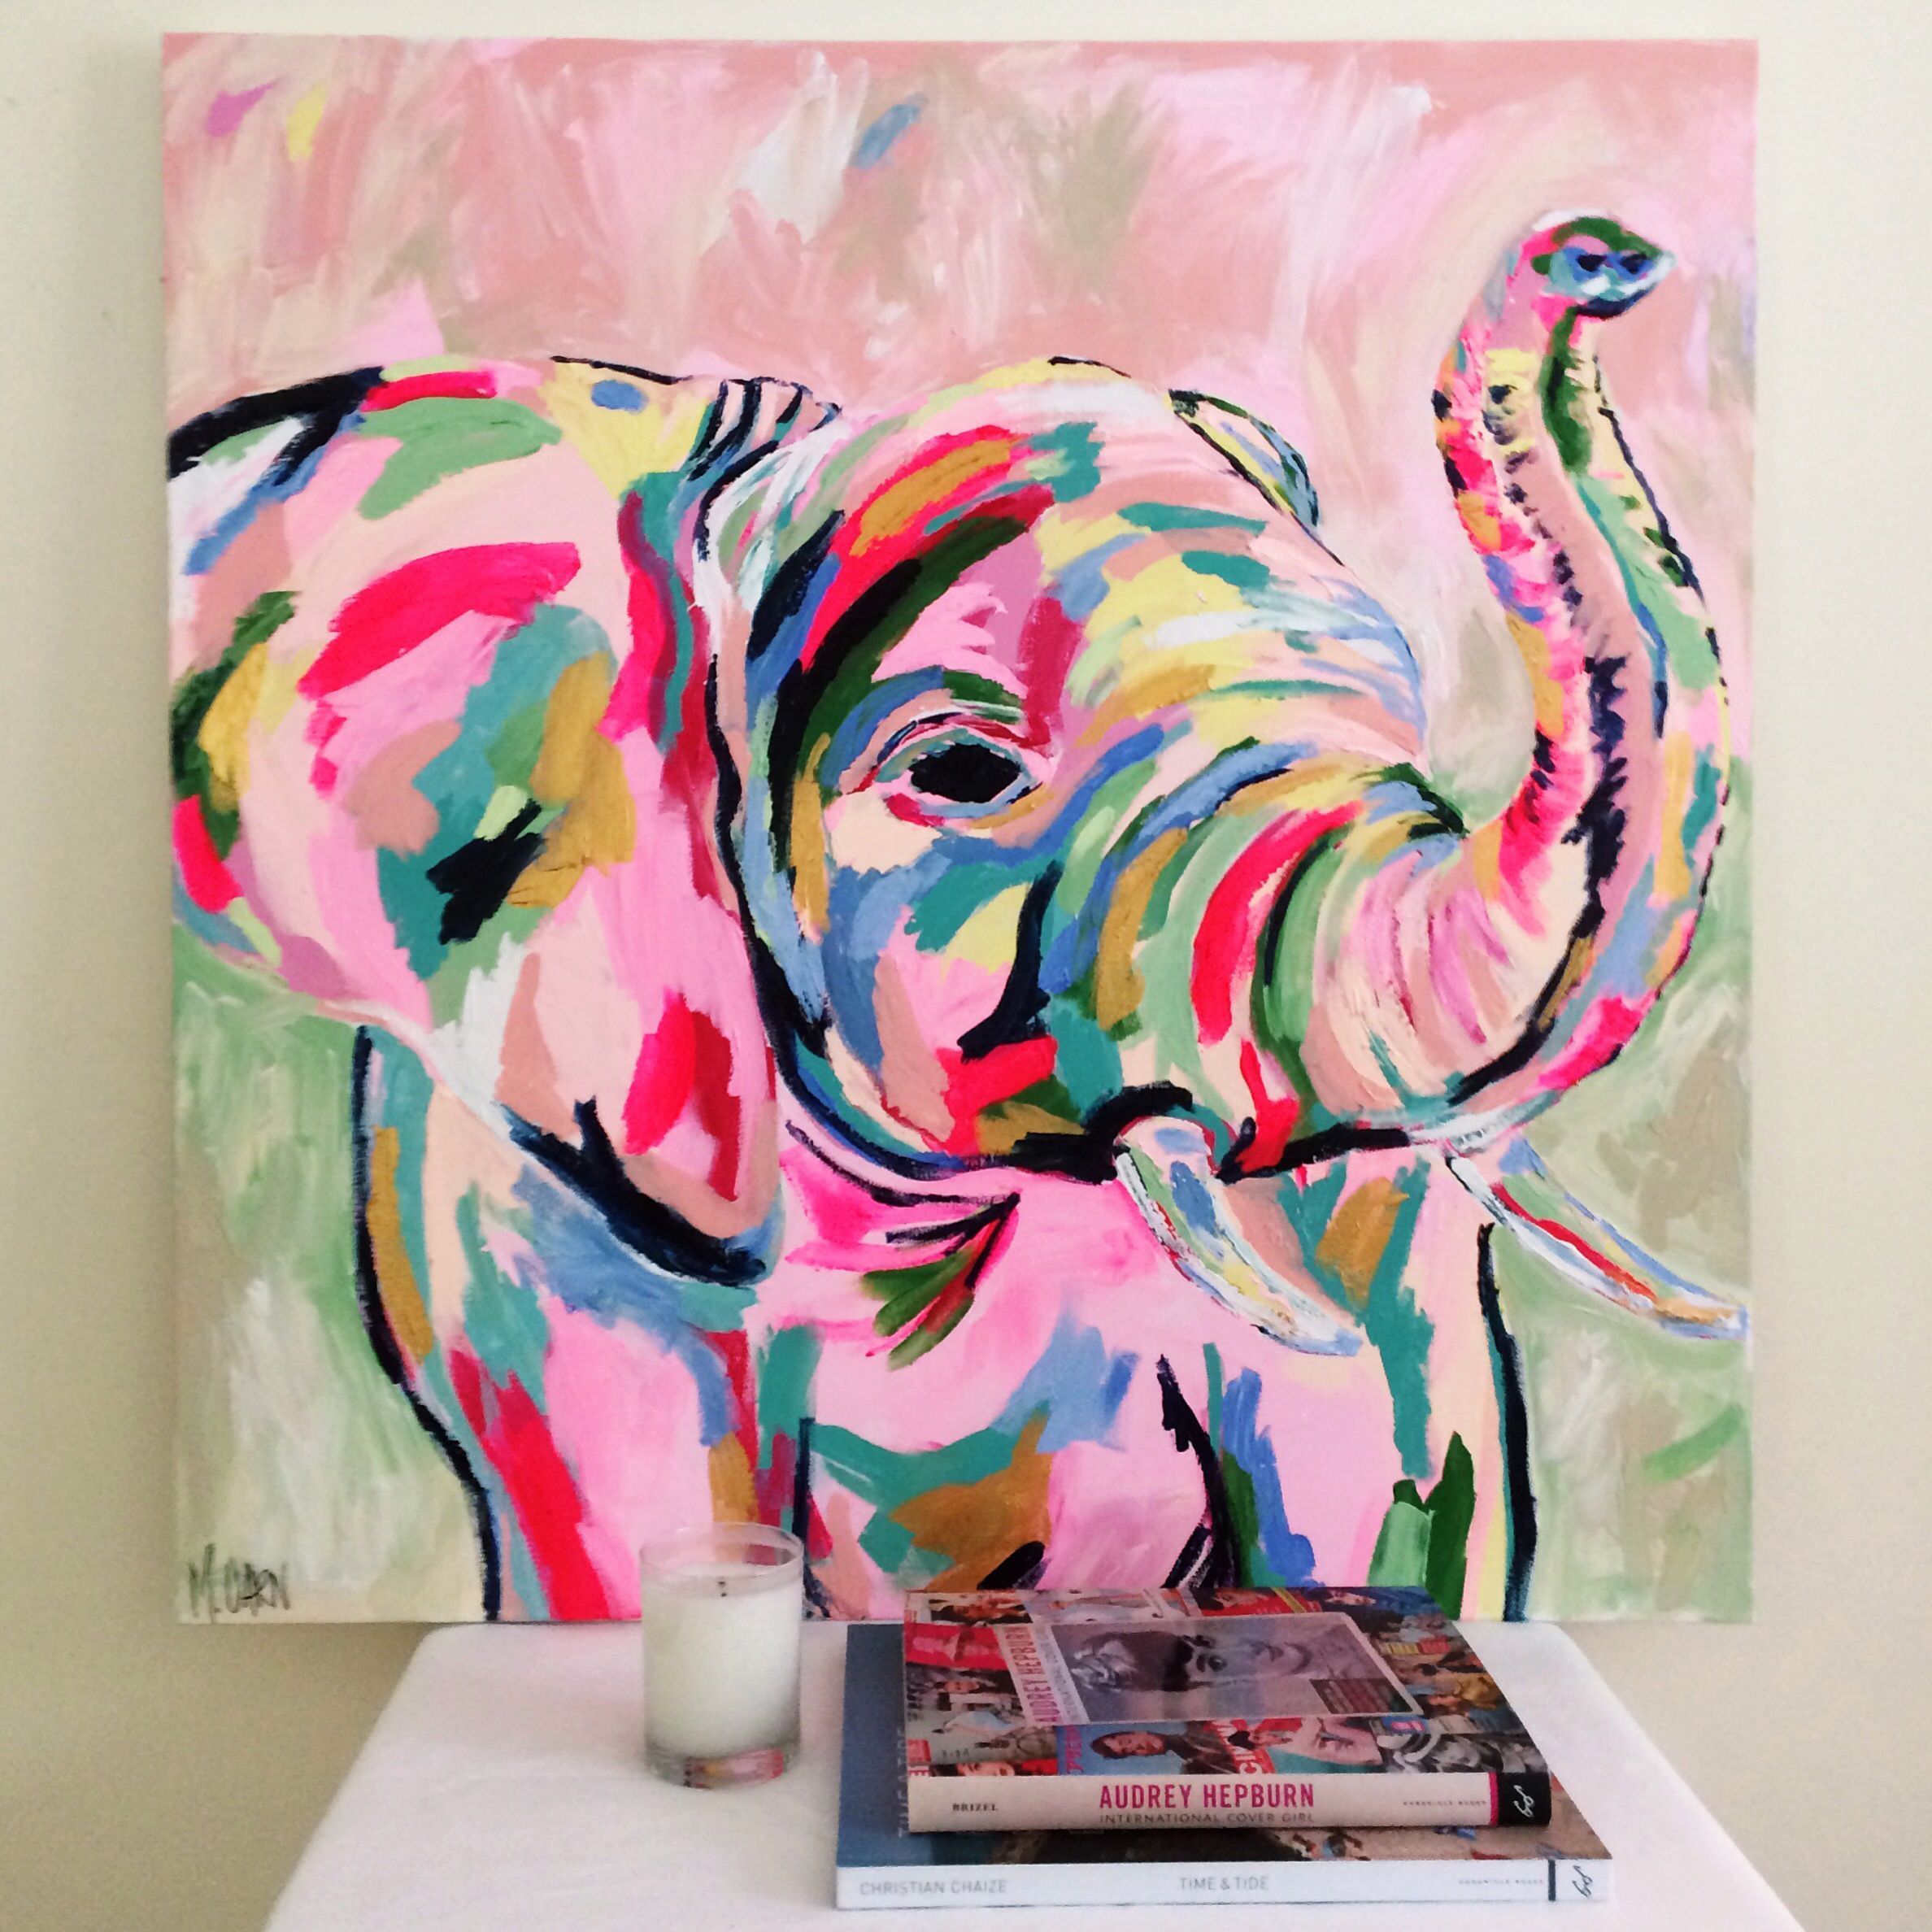 this is so cool!!! im pretty sure i need to try to paint a similar one.